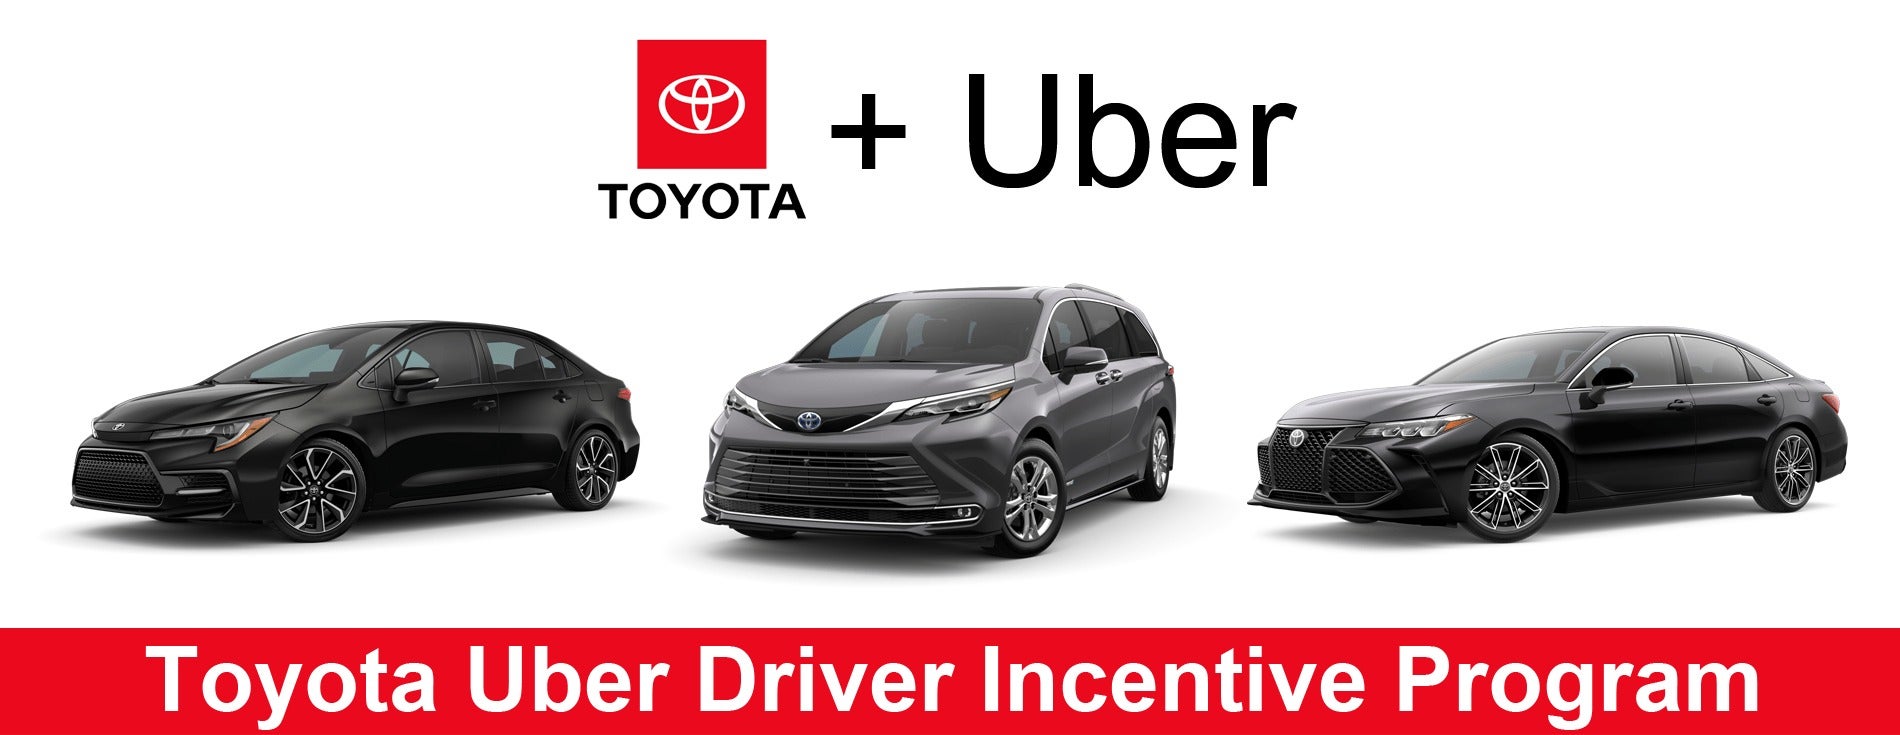 Toyota uber incentive banner